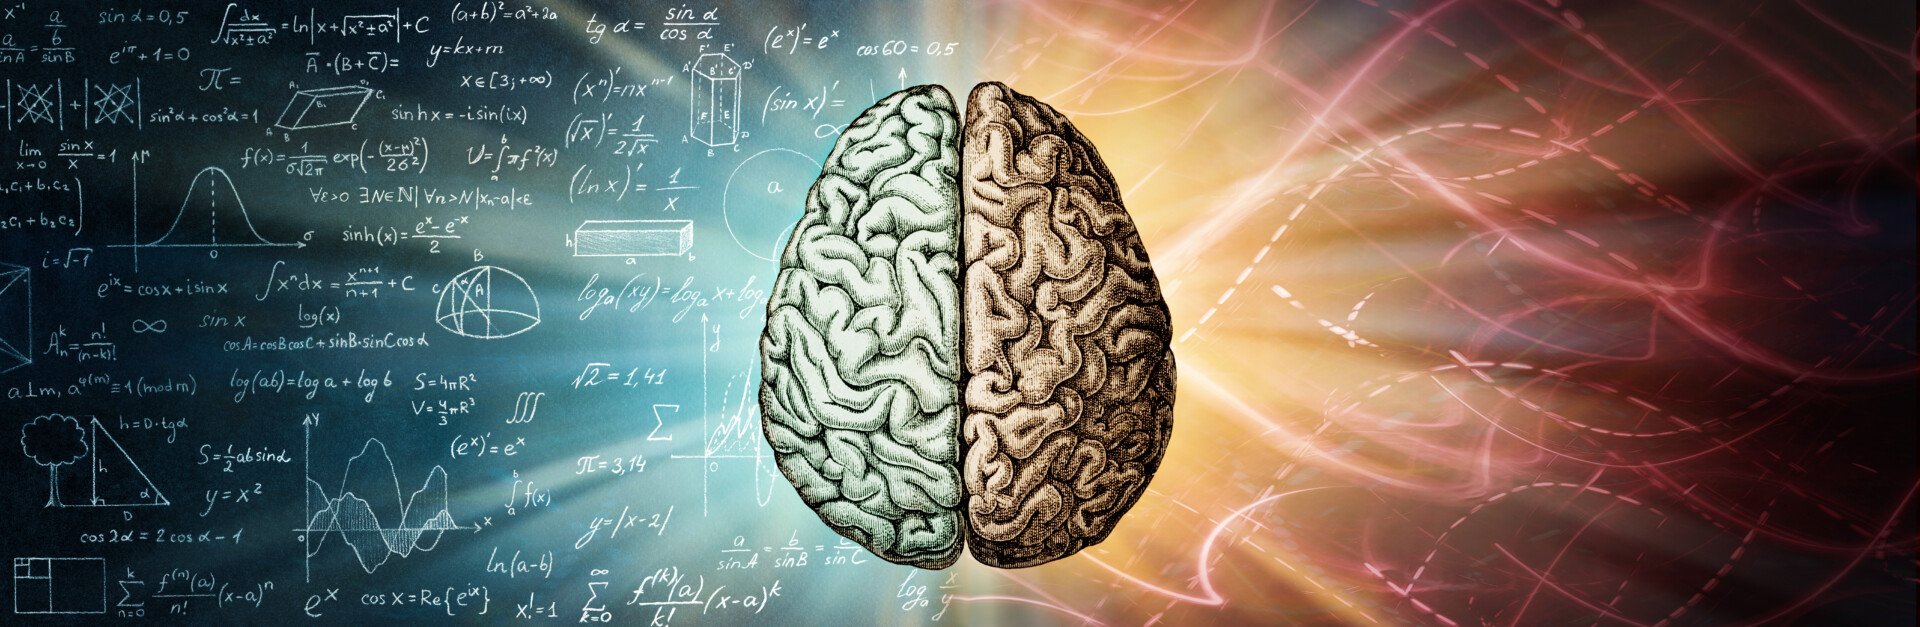 a brain with a background where there is a blackboard with equations on the left side, and various light reflections on the right.